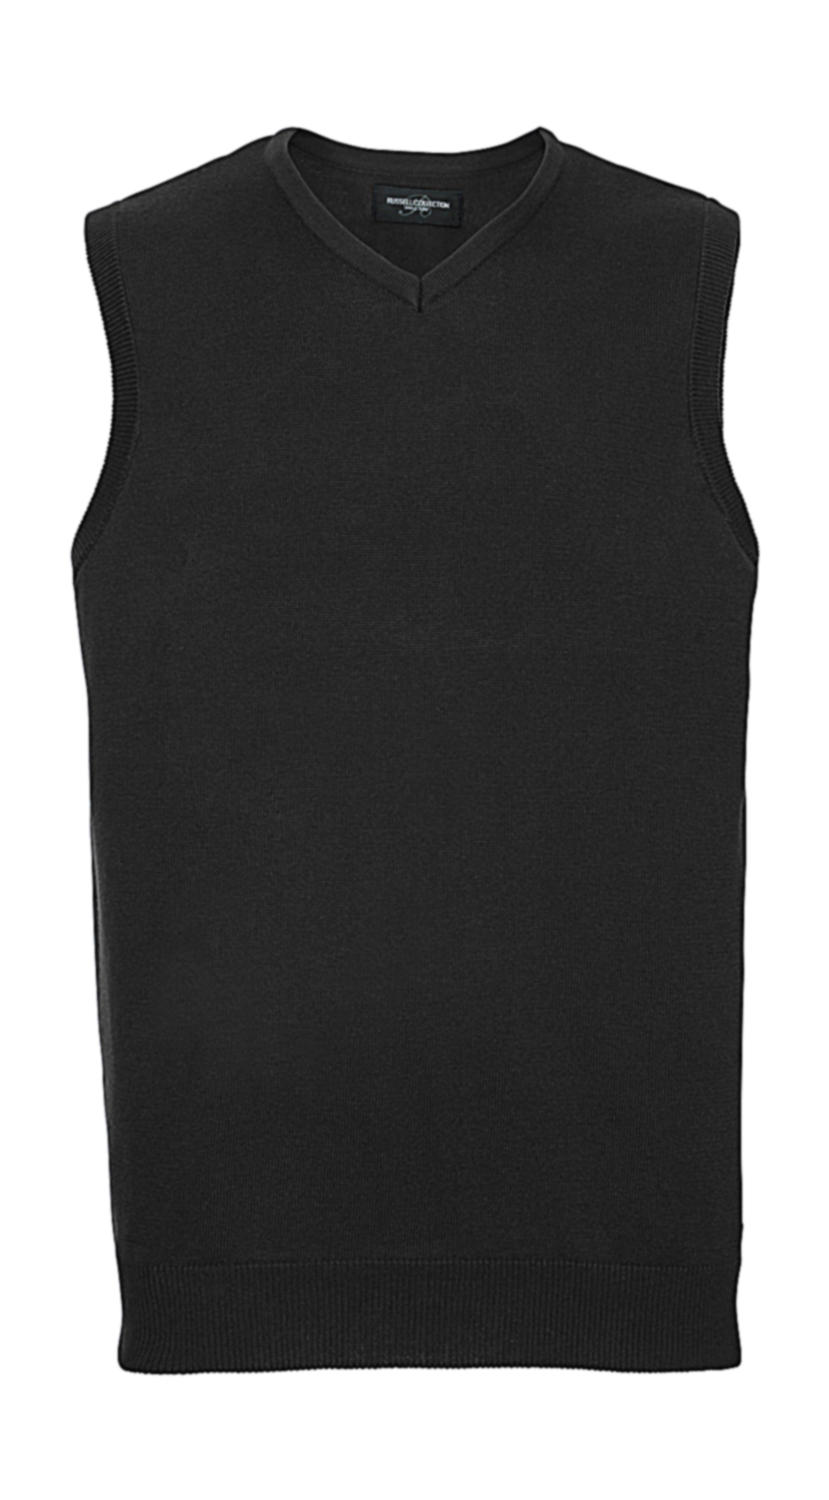  Adults V-Neck Sleeveless Knitted Pullover in Farbe Charcoal Marl